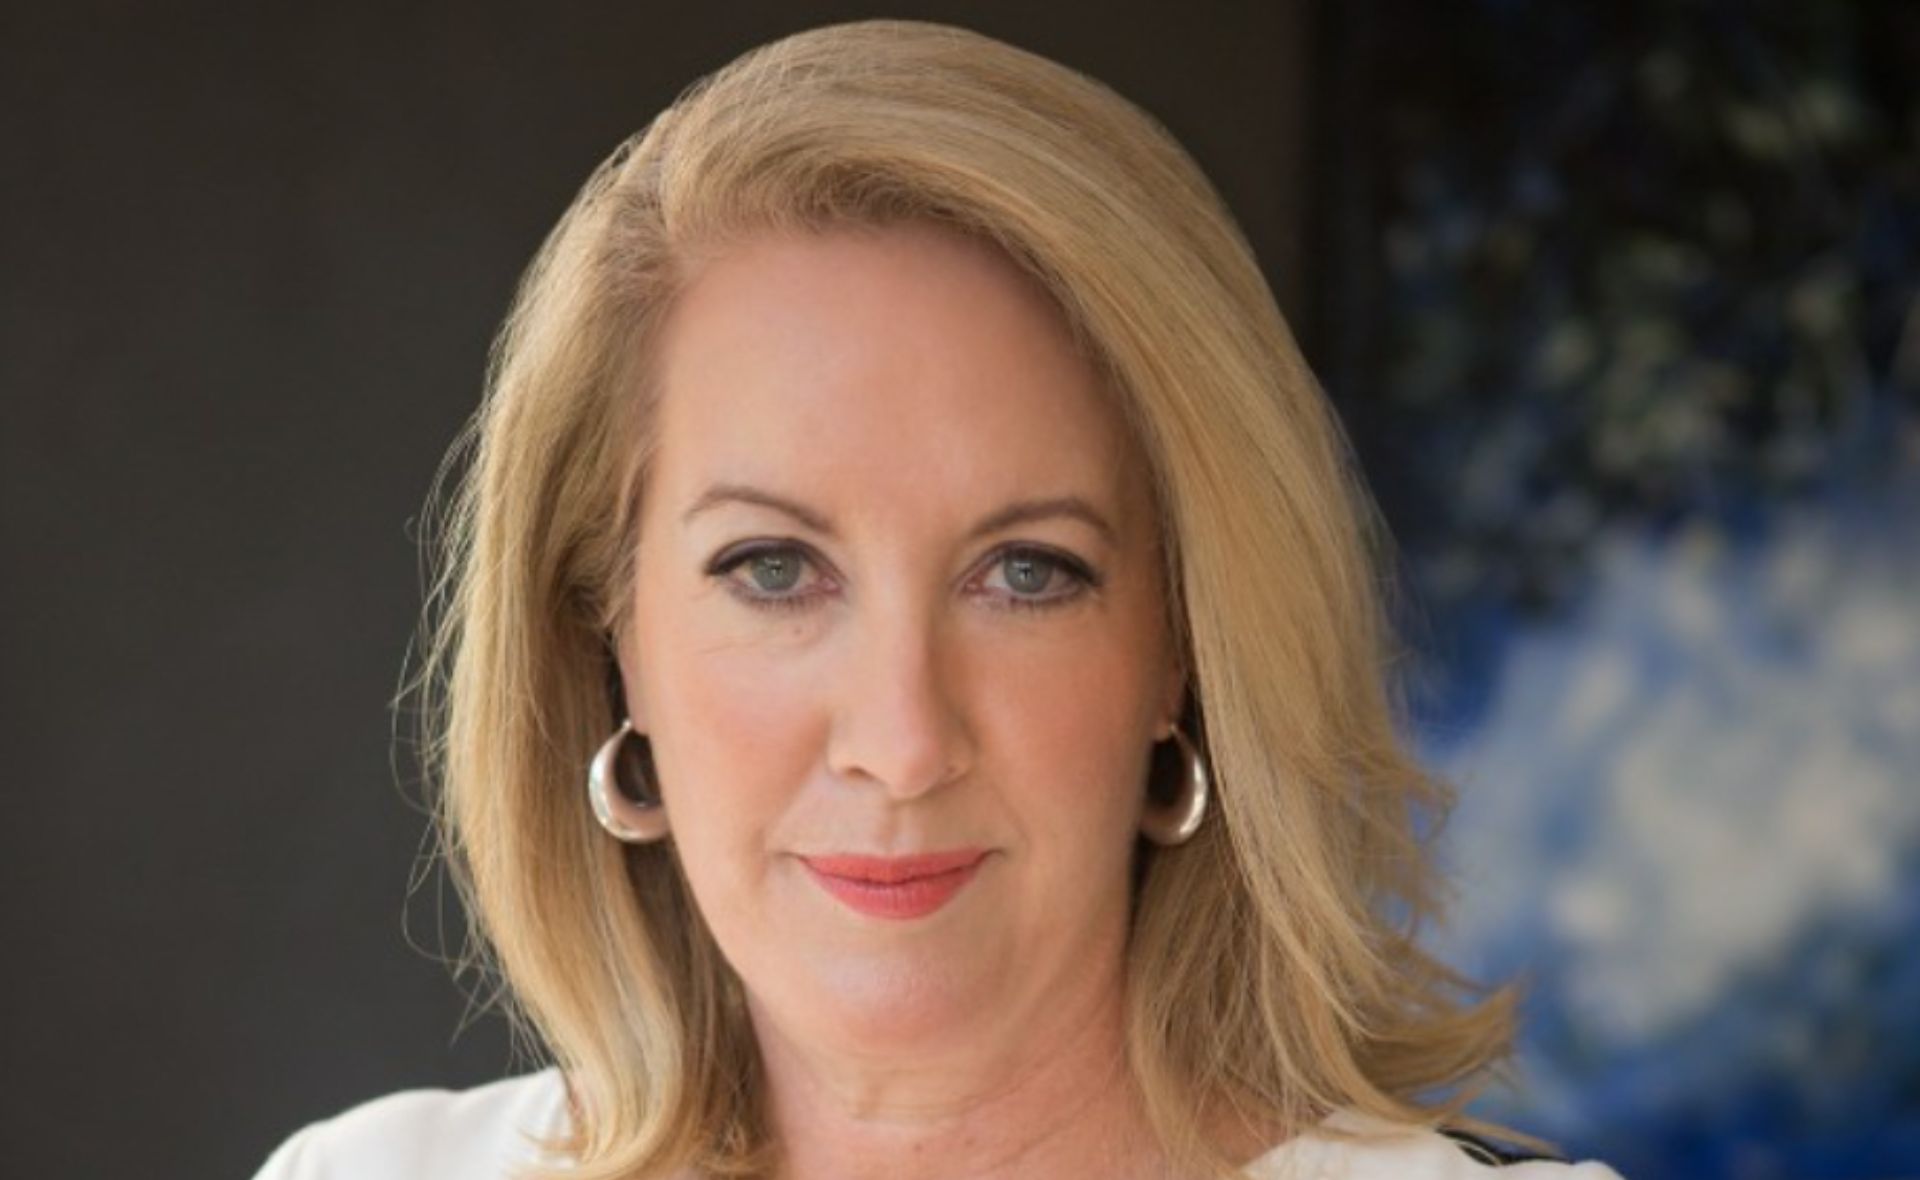 Elizabeth Broderick OA’s uplifting message ahead of the 2022 Women Of The Future Awards